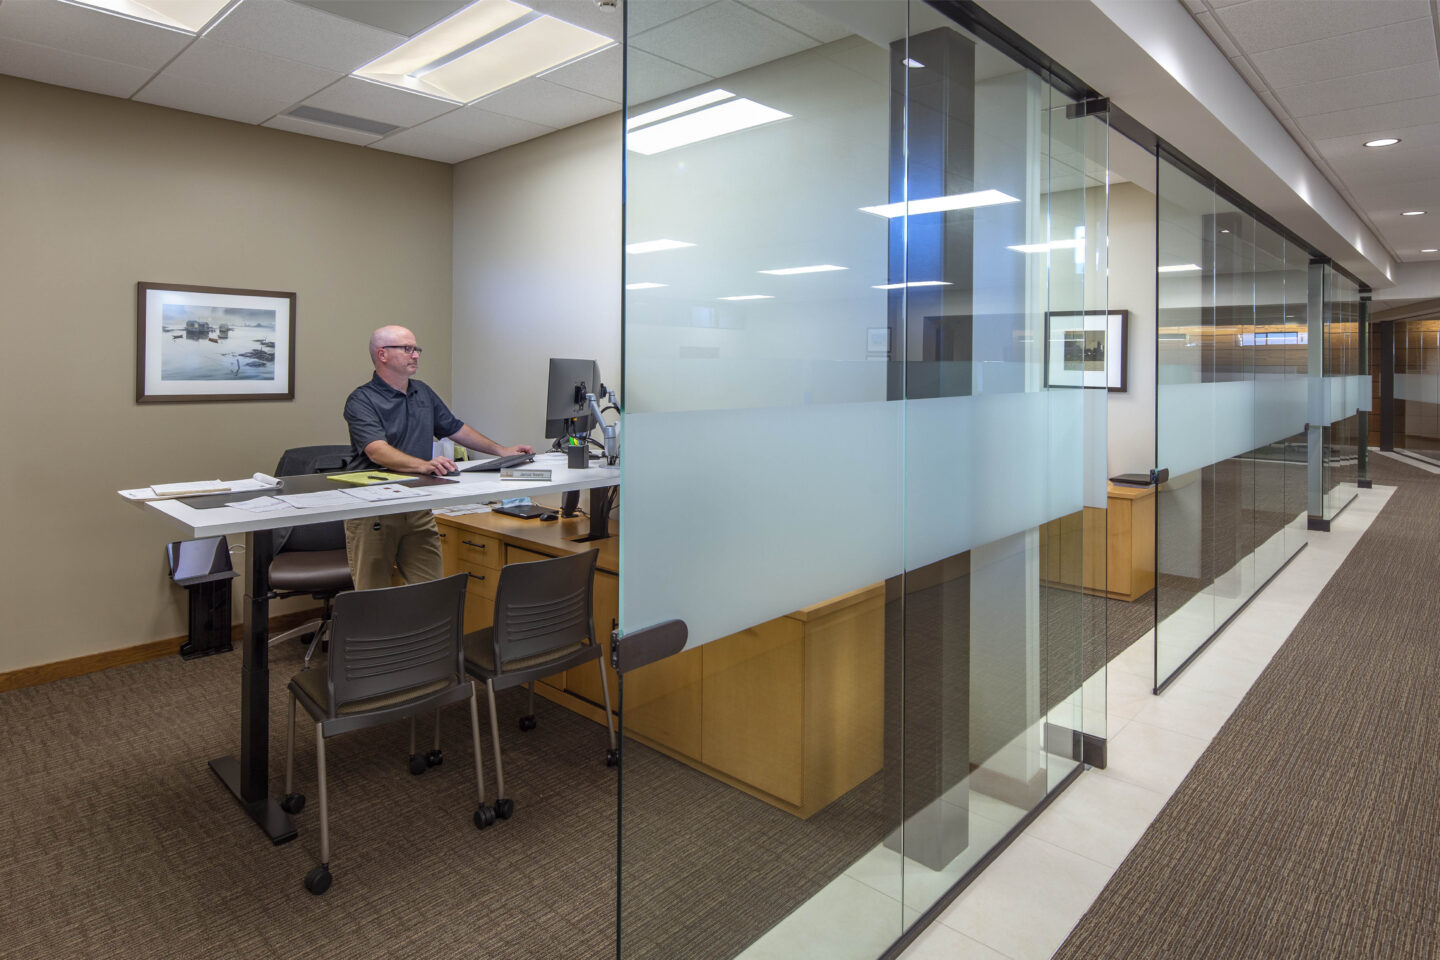 A person works from a glass-enclosed office with a view down the hallway